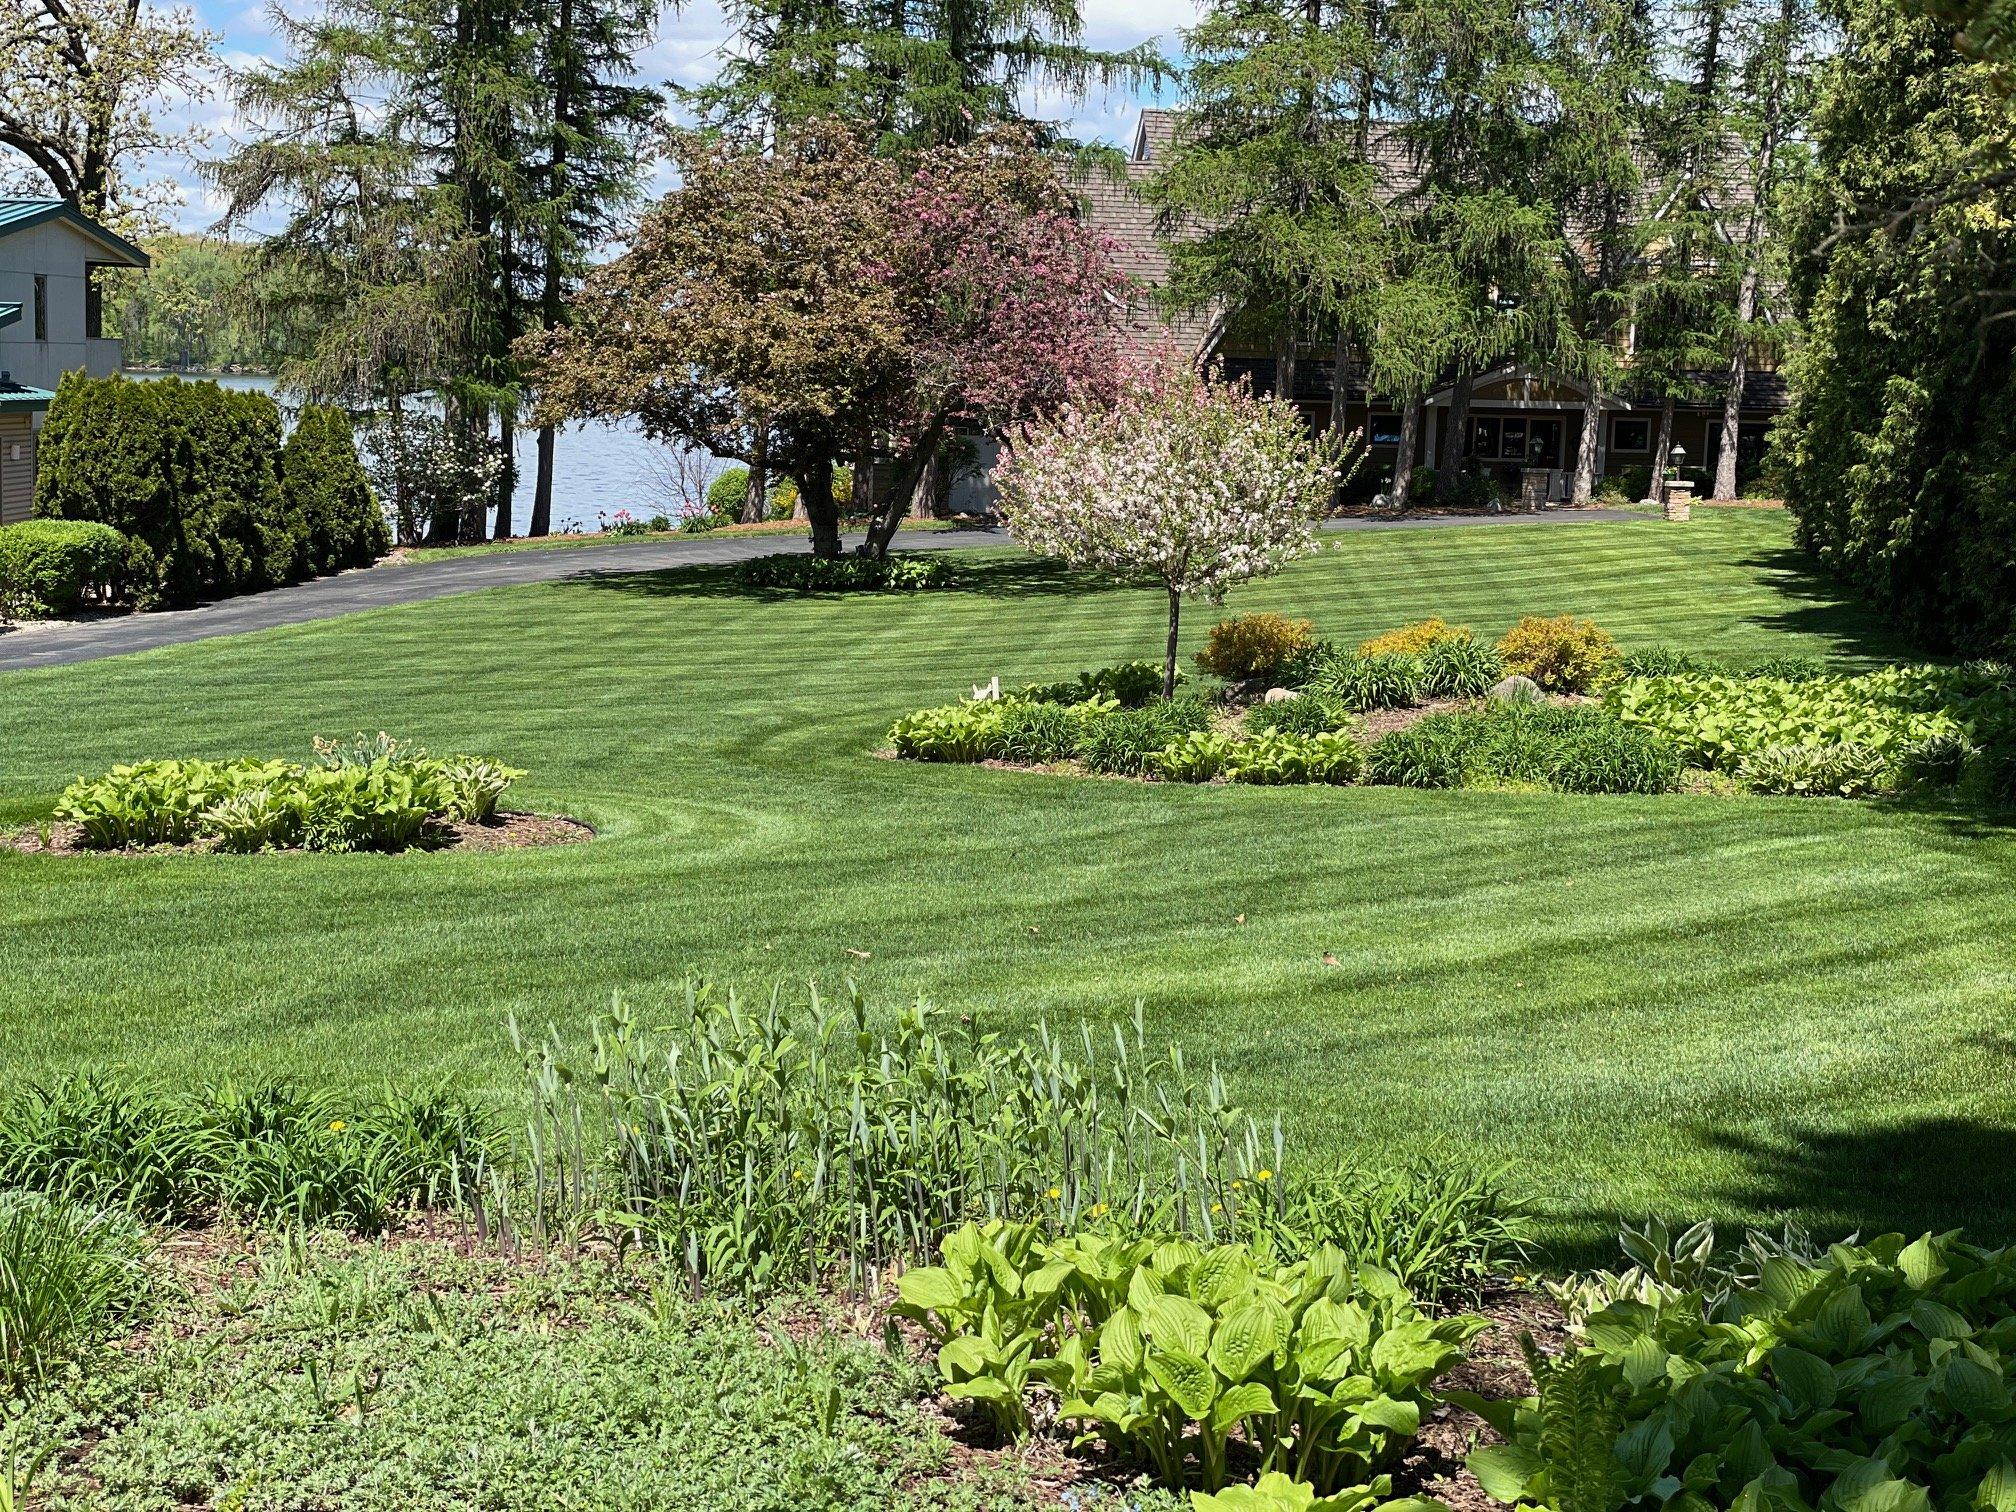 Effortless lawn care experience for a lush, green lawn to be proud of.